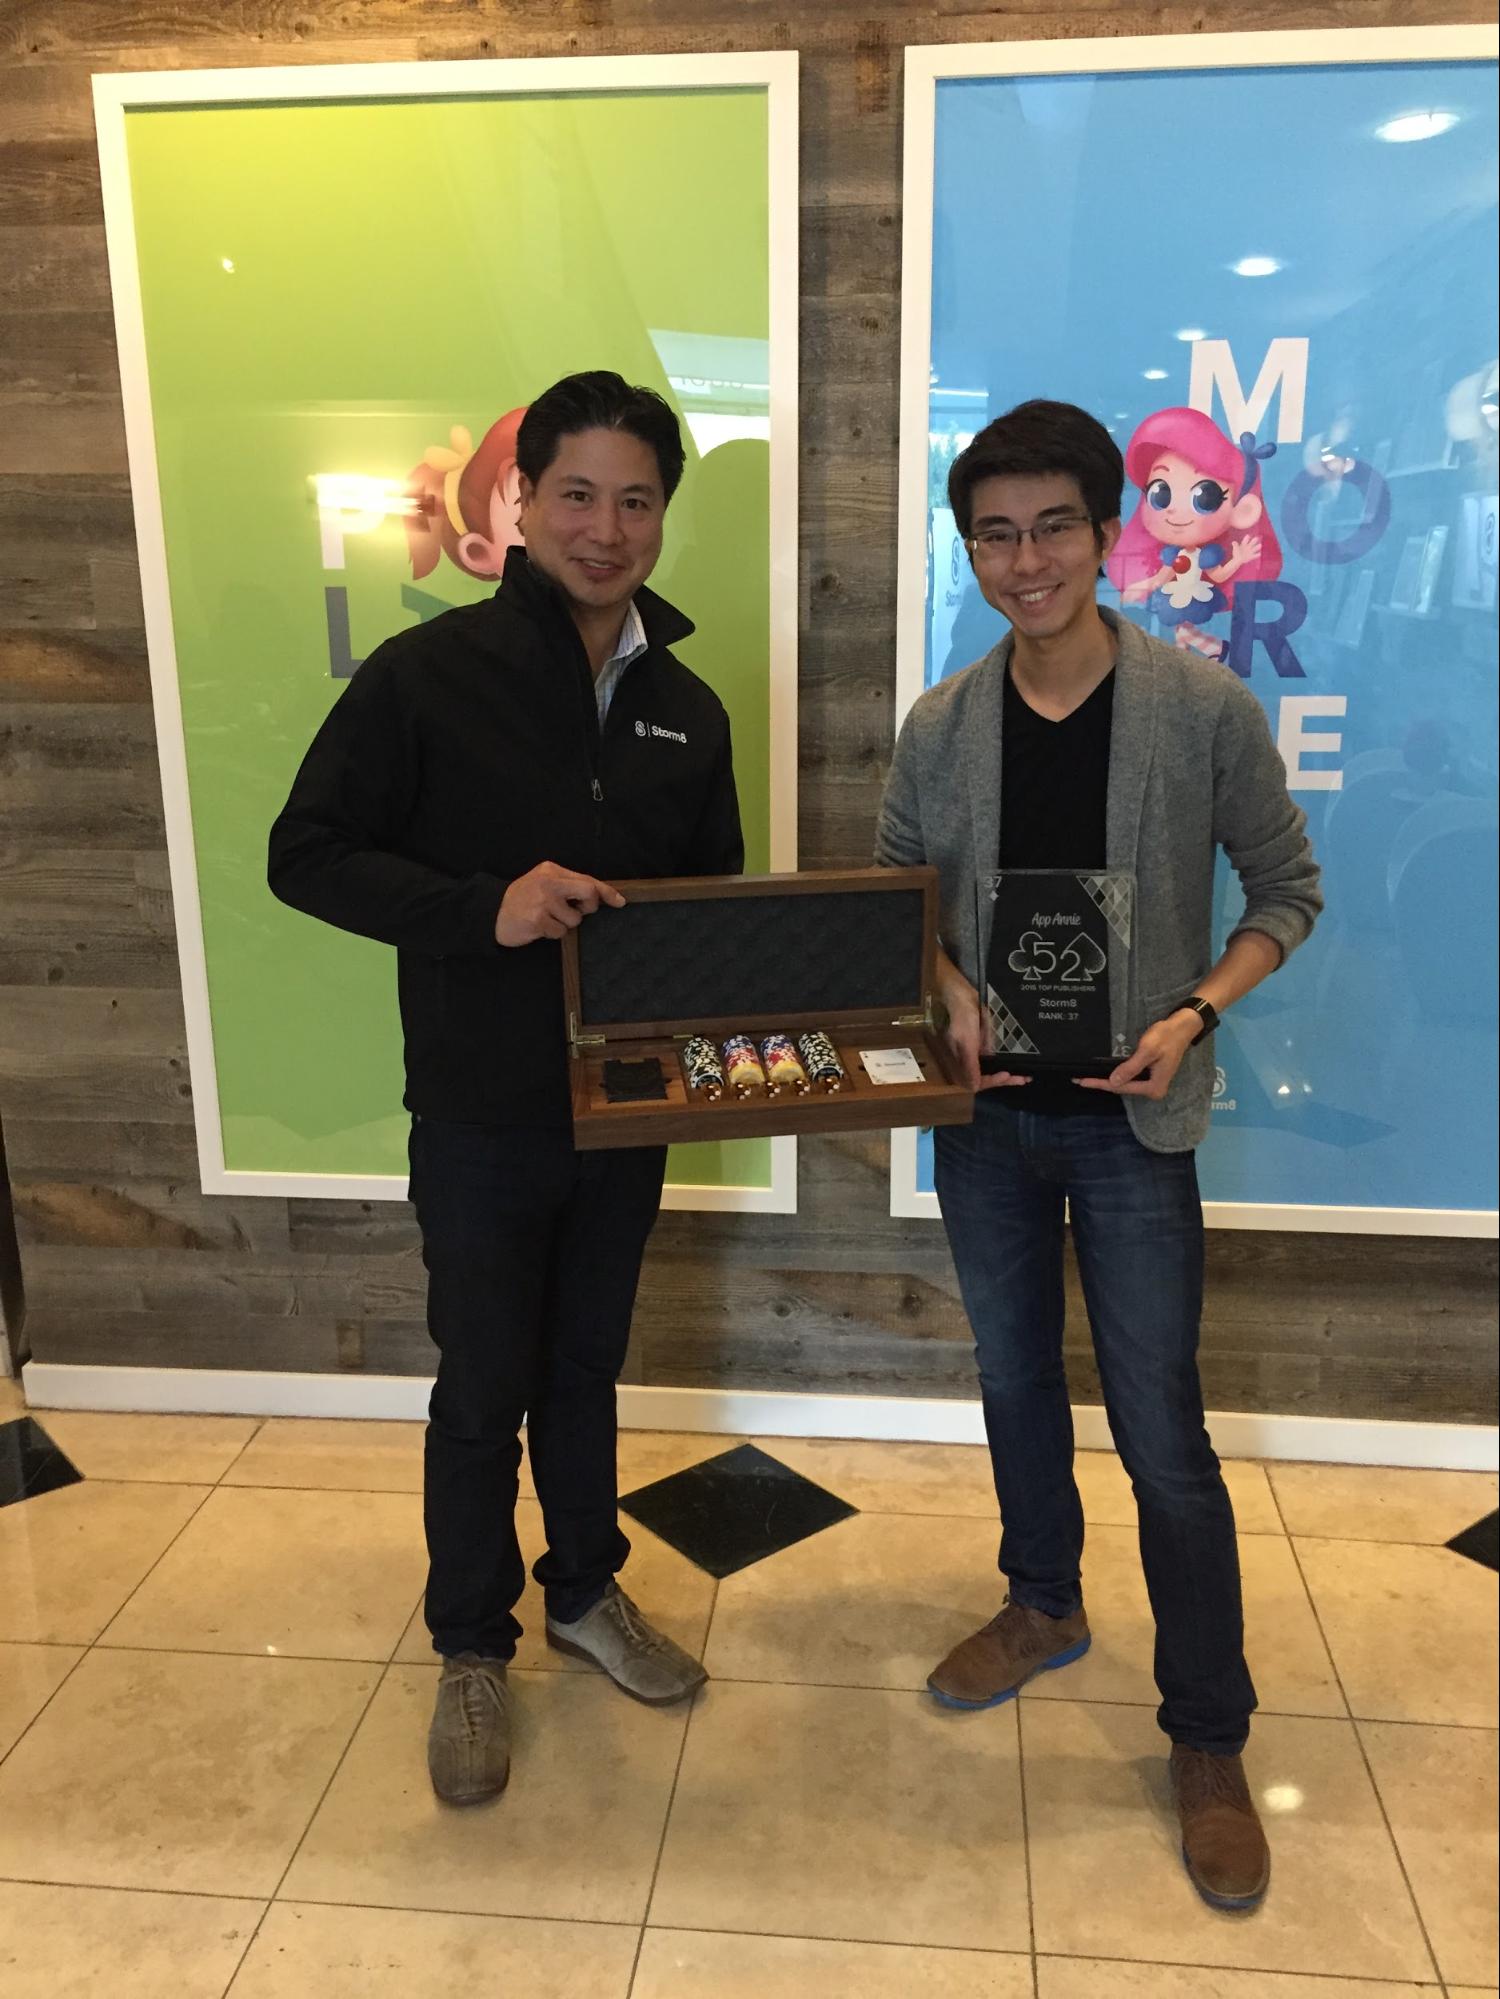 Storm 8 Accepts the App Annie Top 52 award